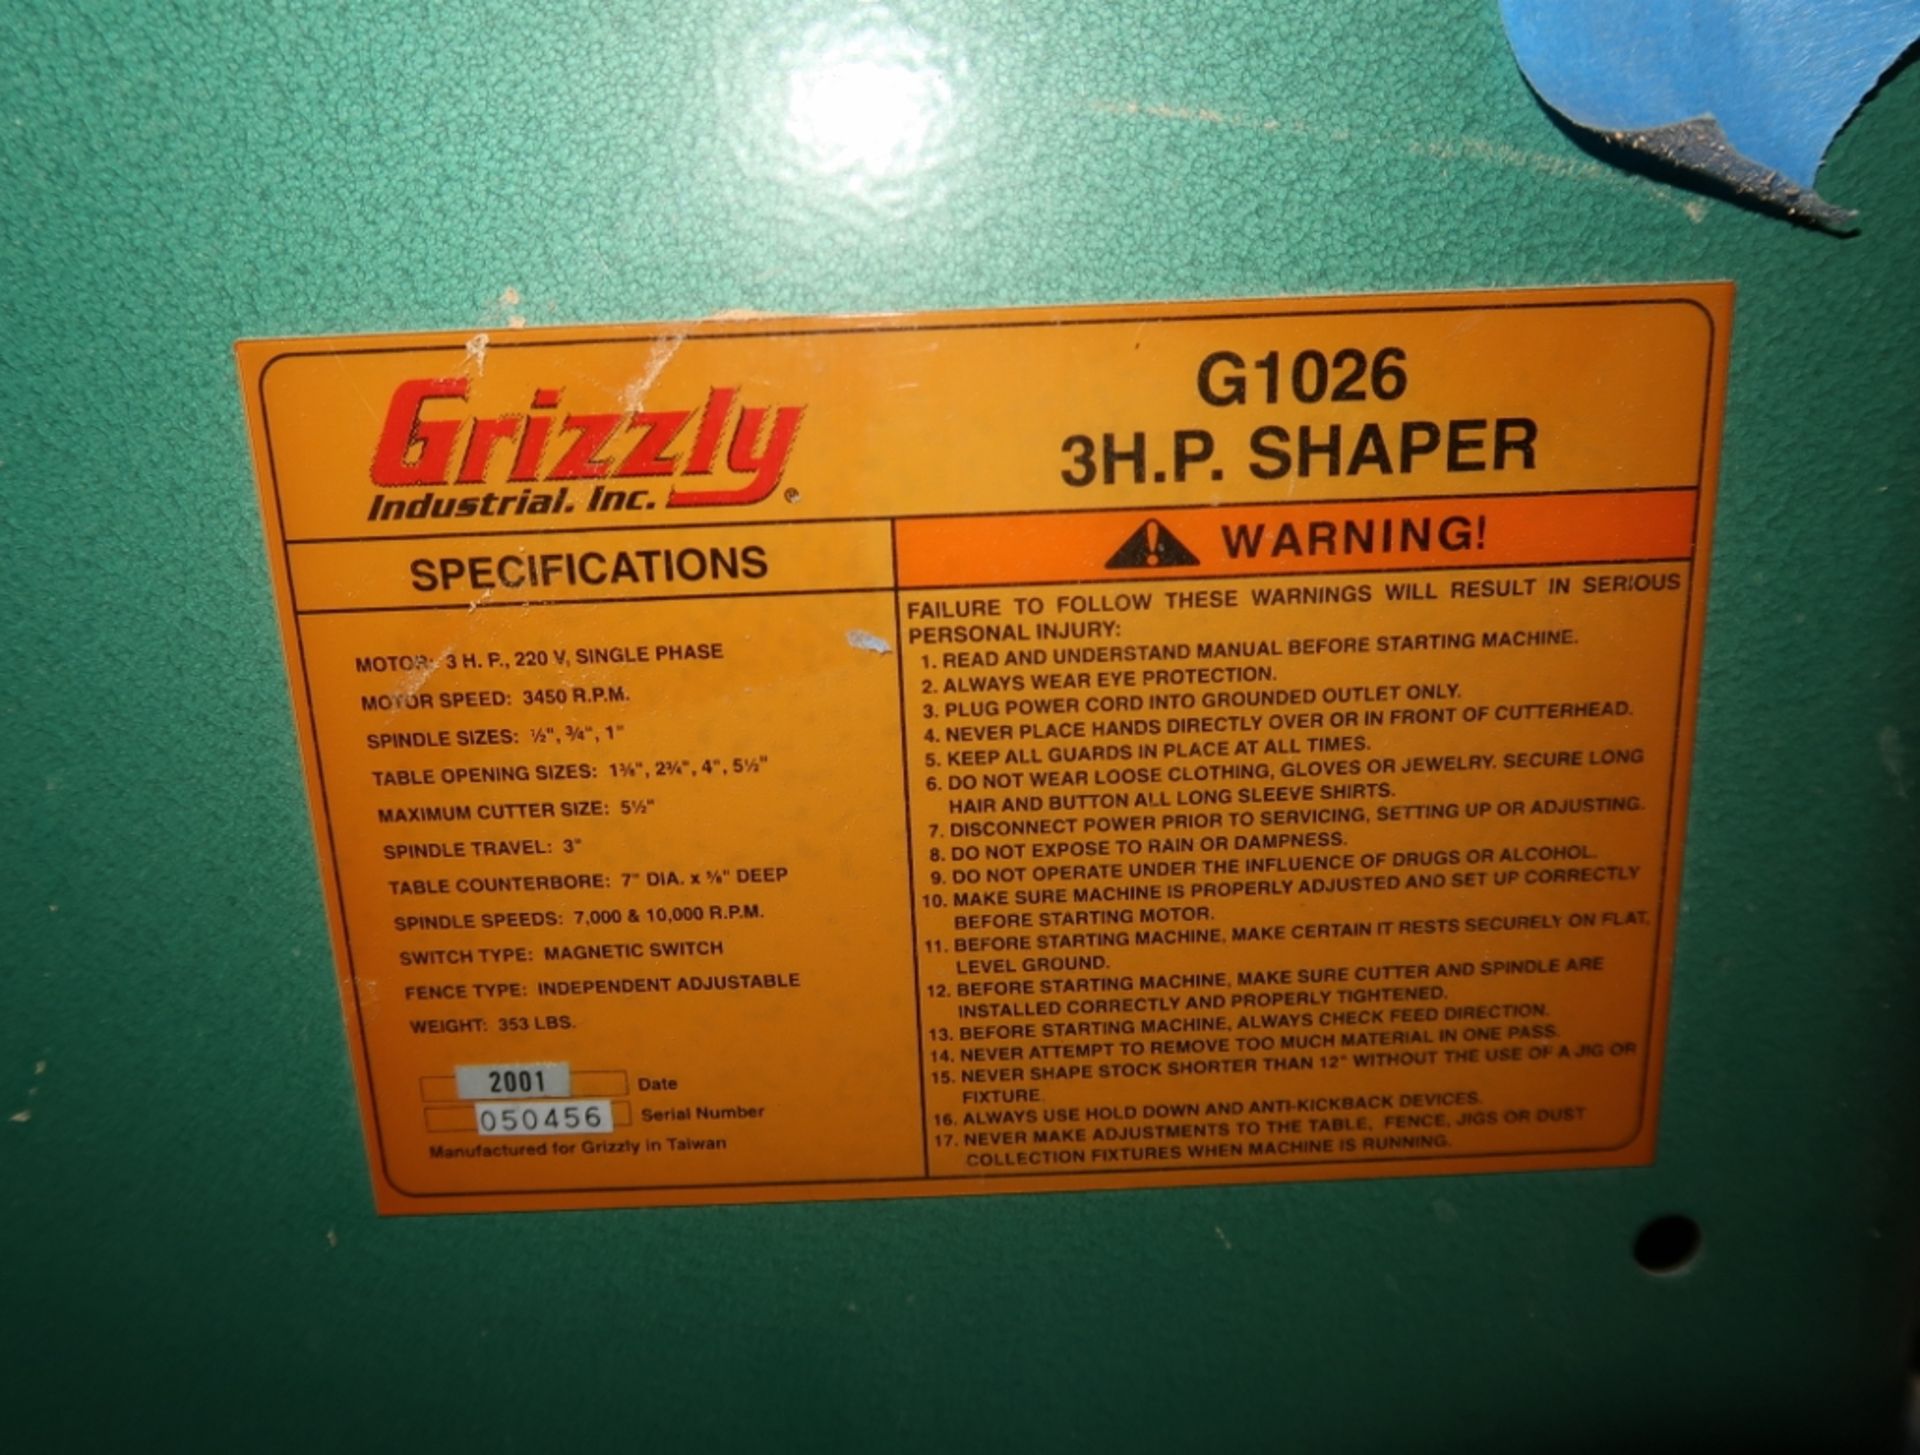 GRIZZLY 3HP SHAPER MDL. G1026 SN. 050456 - Image 6 of 6